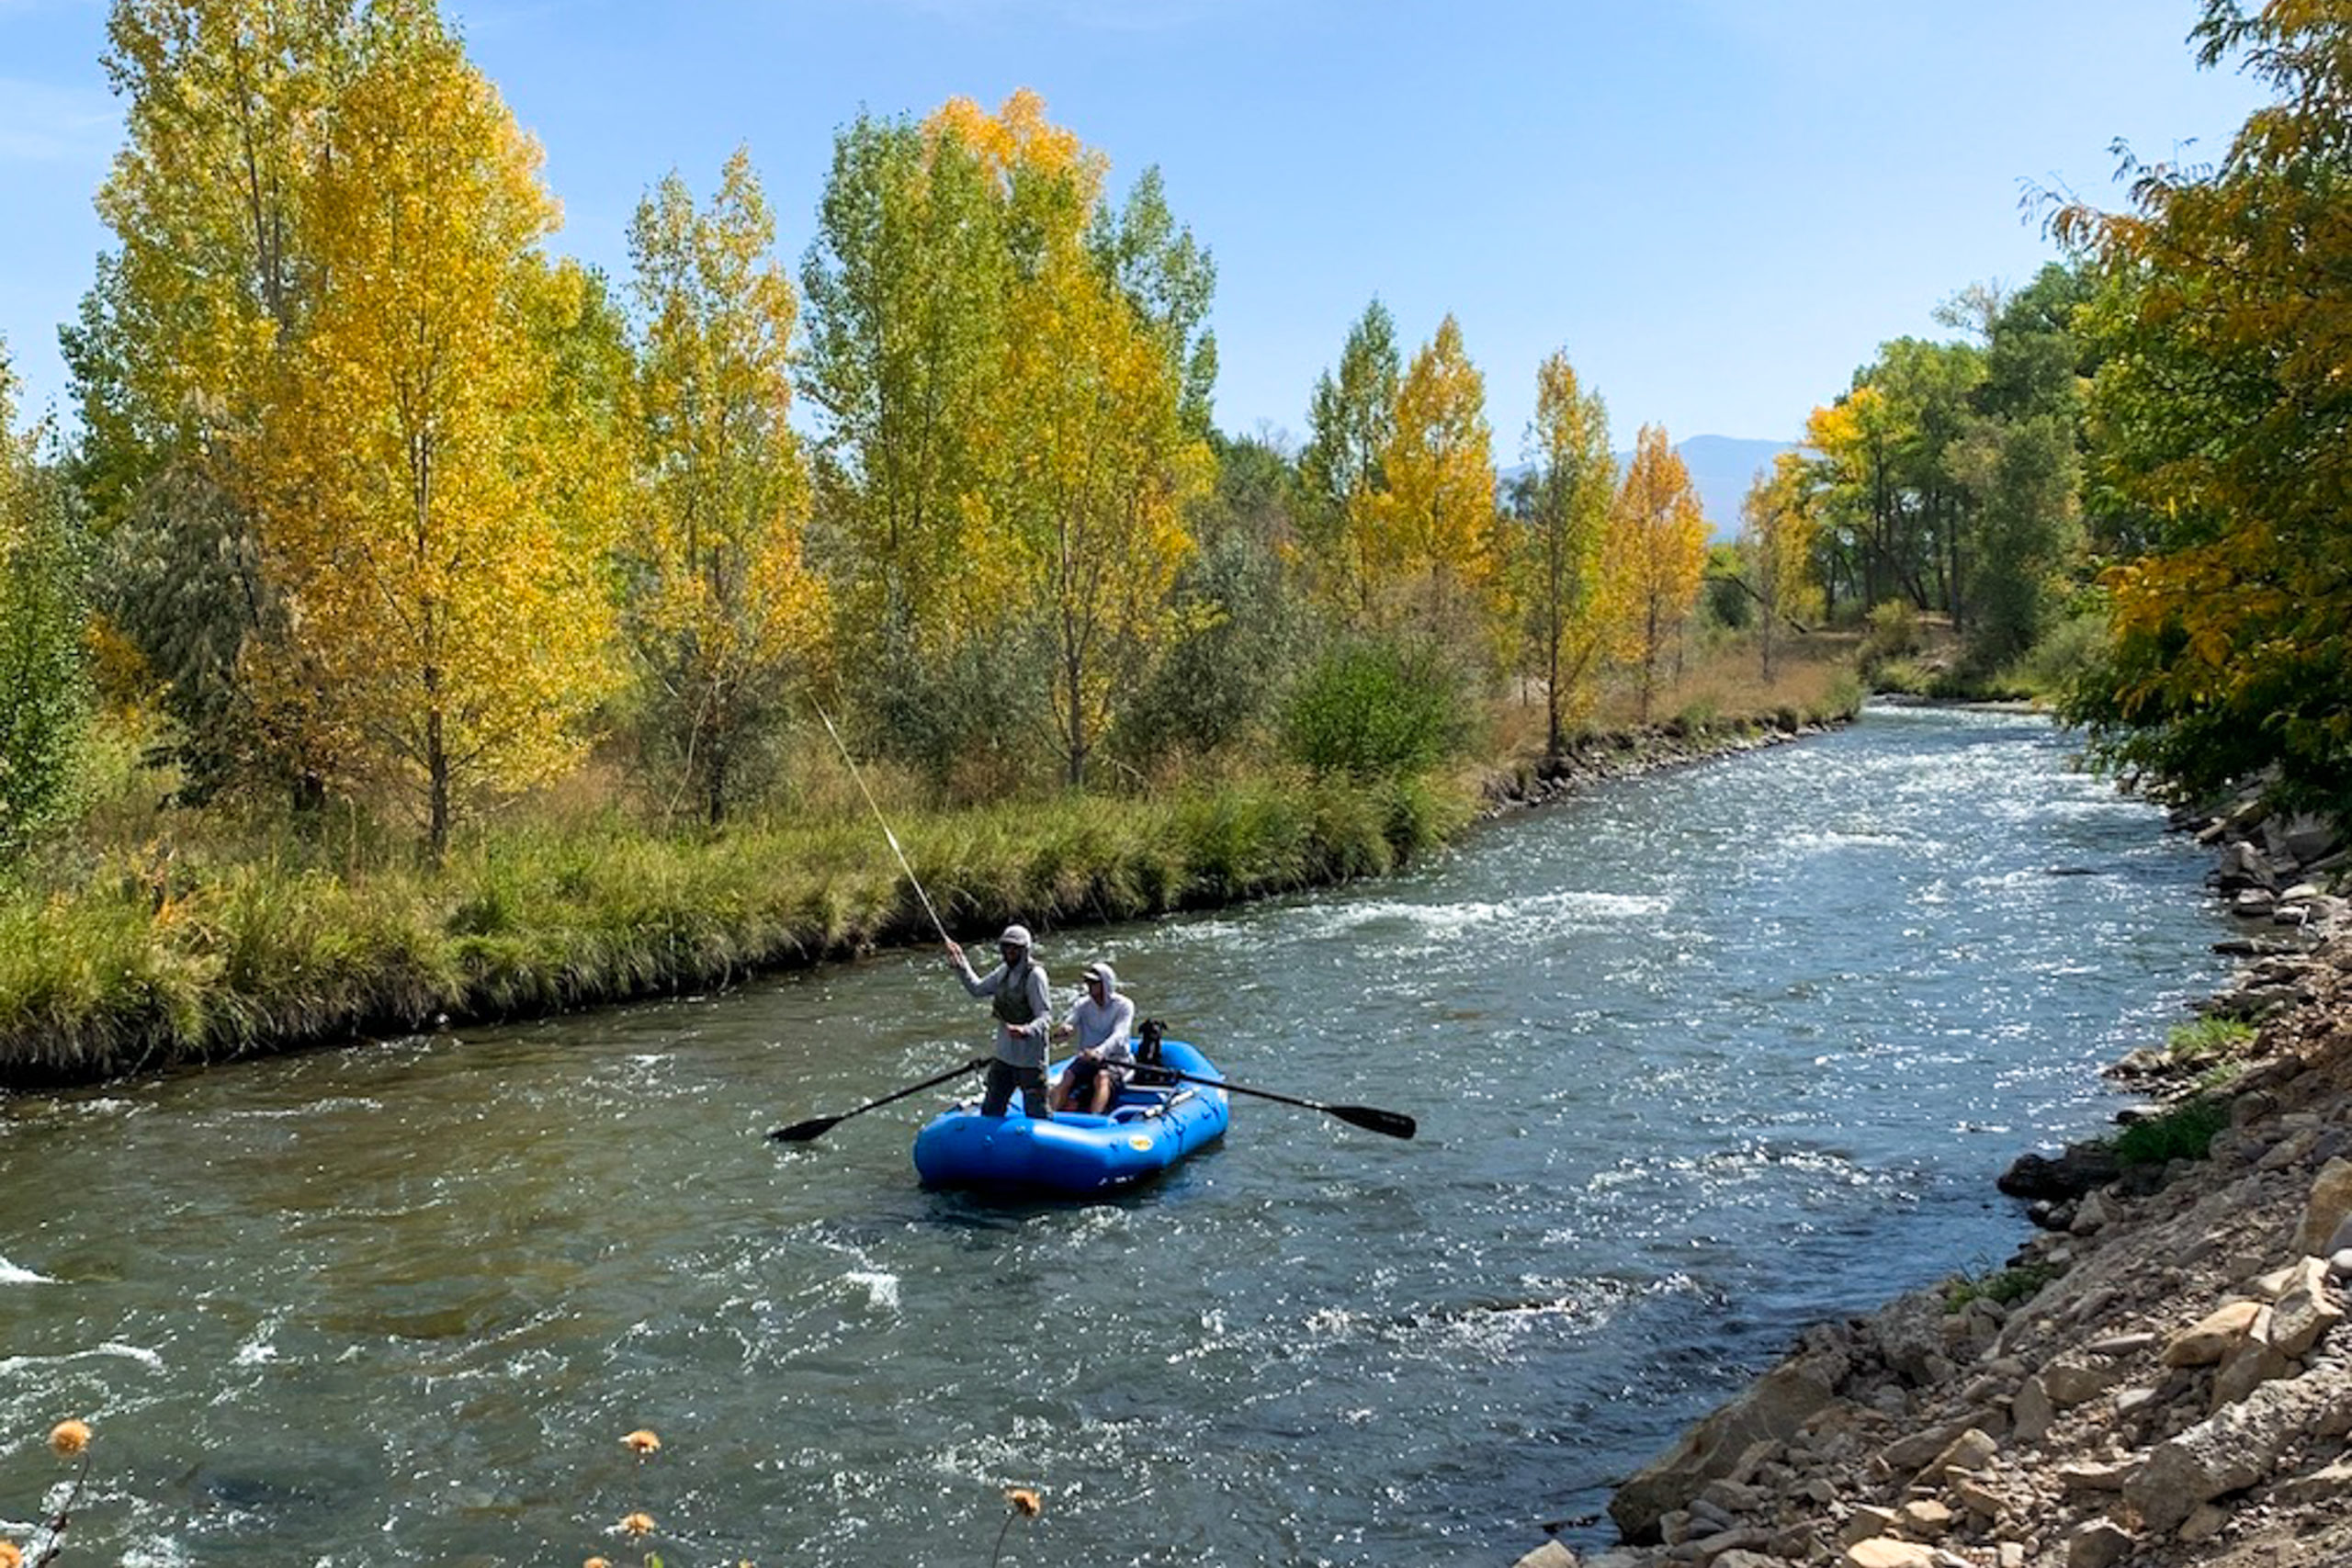 two people paddle in a raft in a river surrounded by greenery and yellow fall foliage